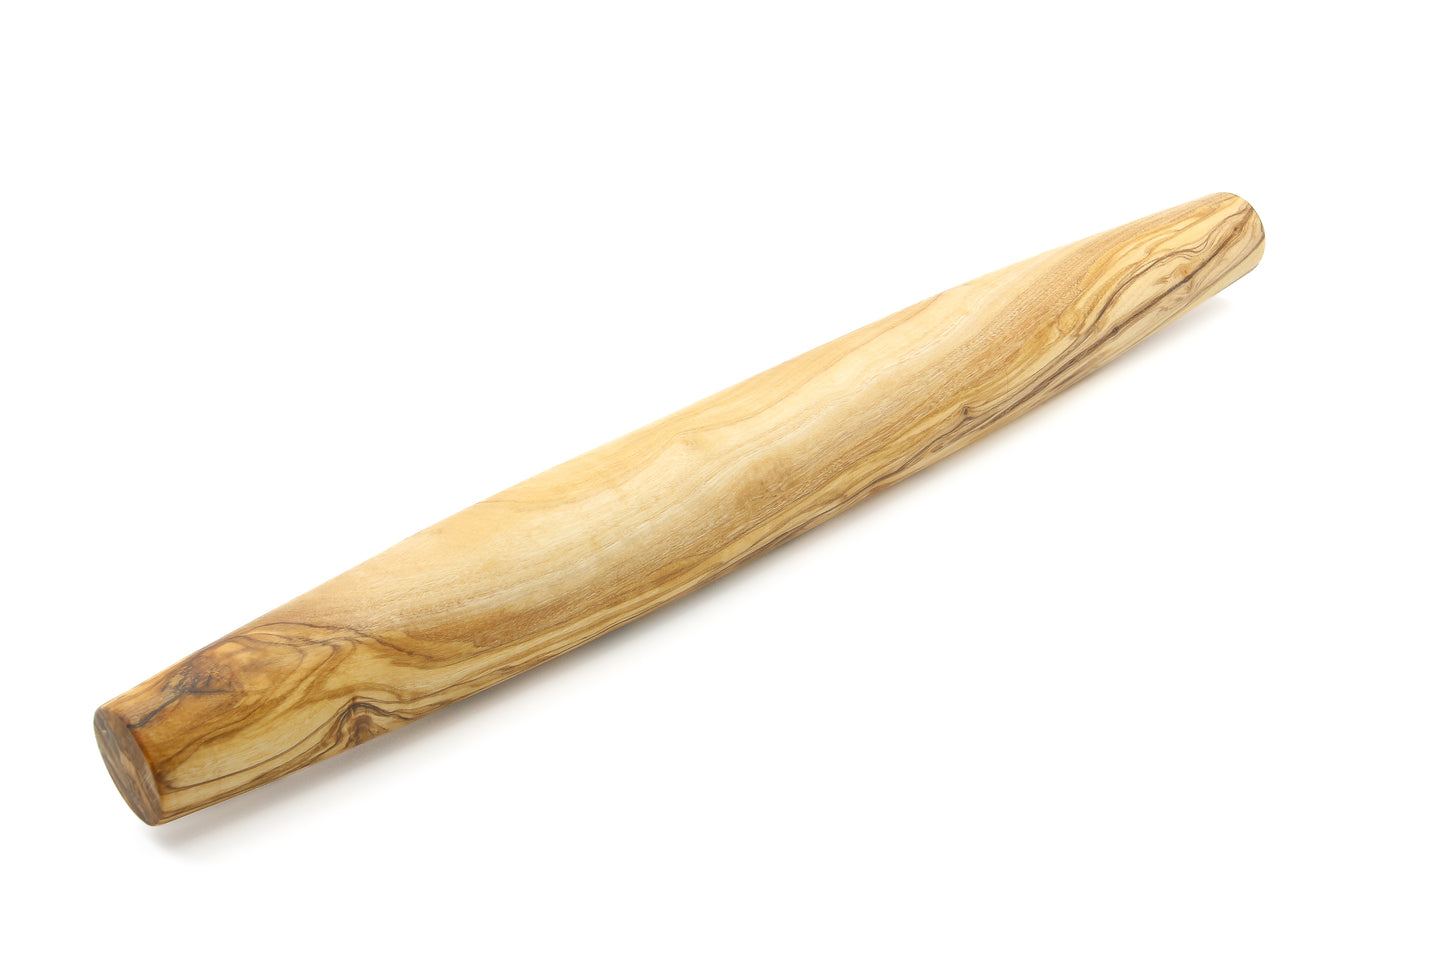 Olive wood rolling pin with a classic design